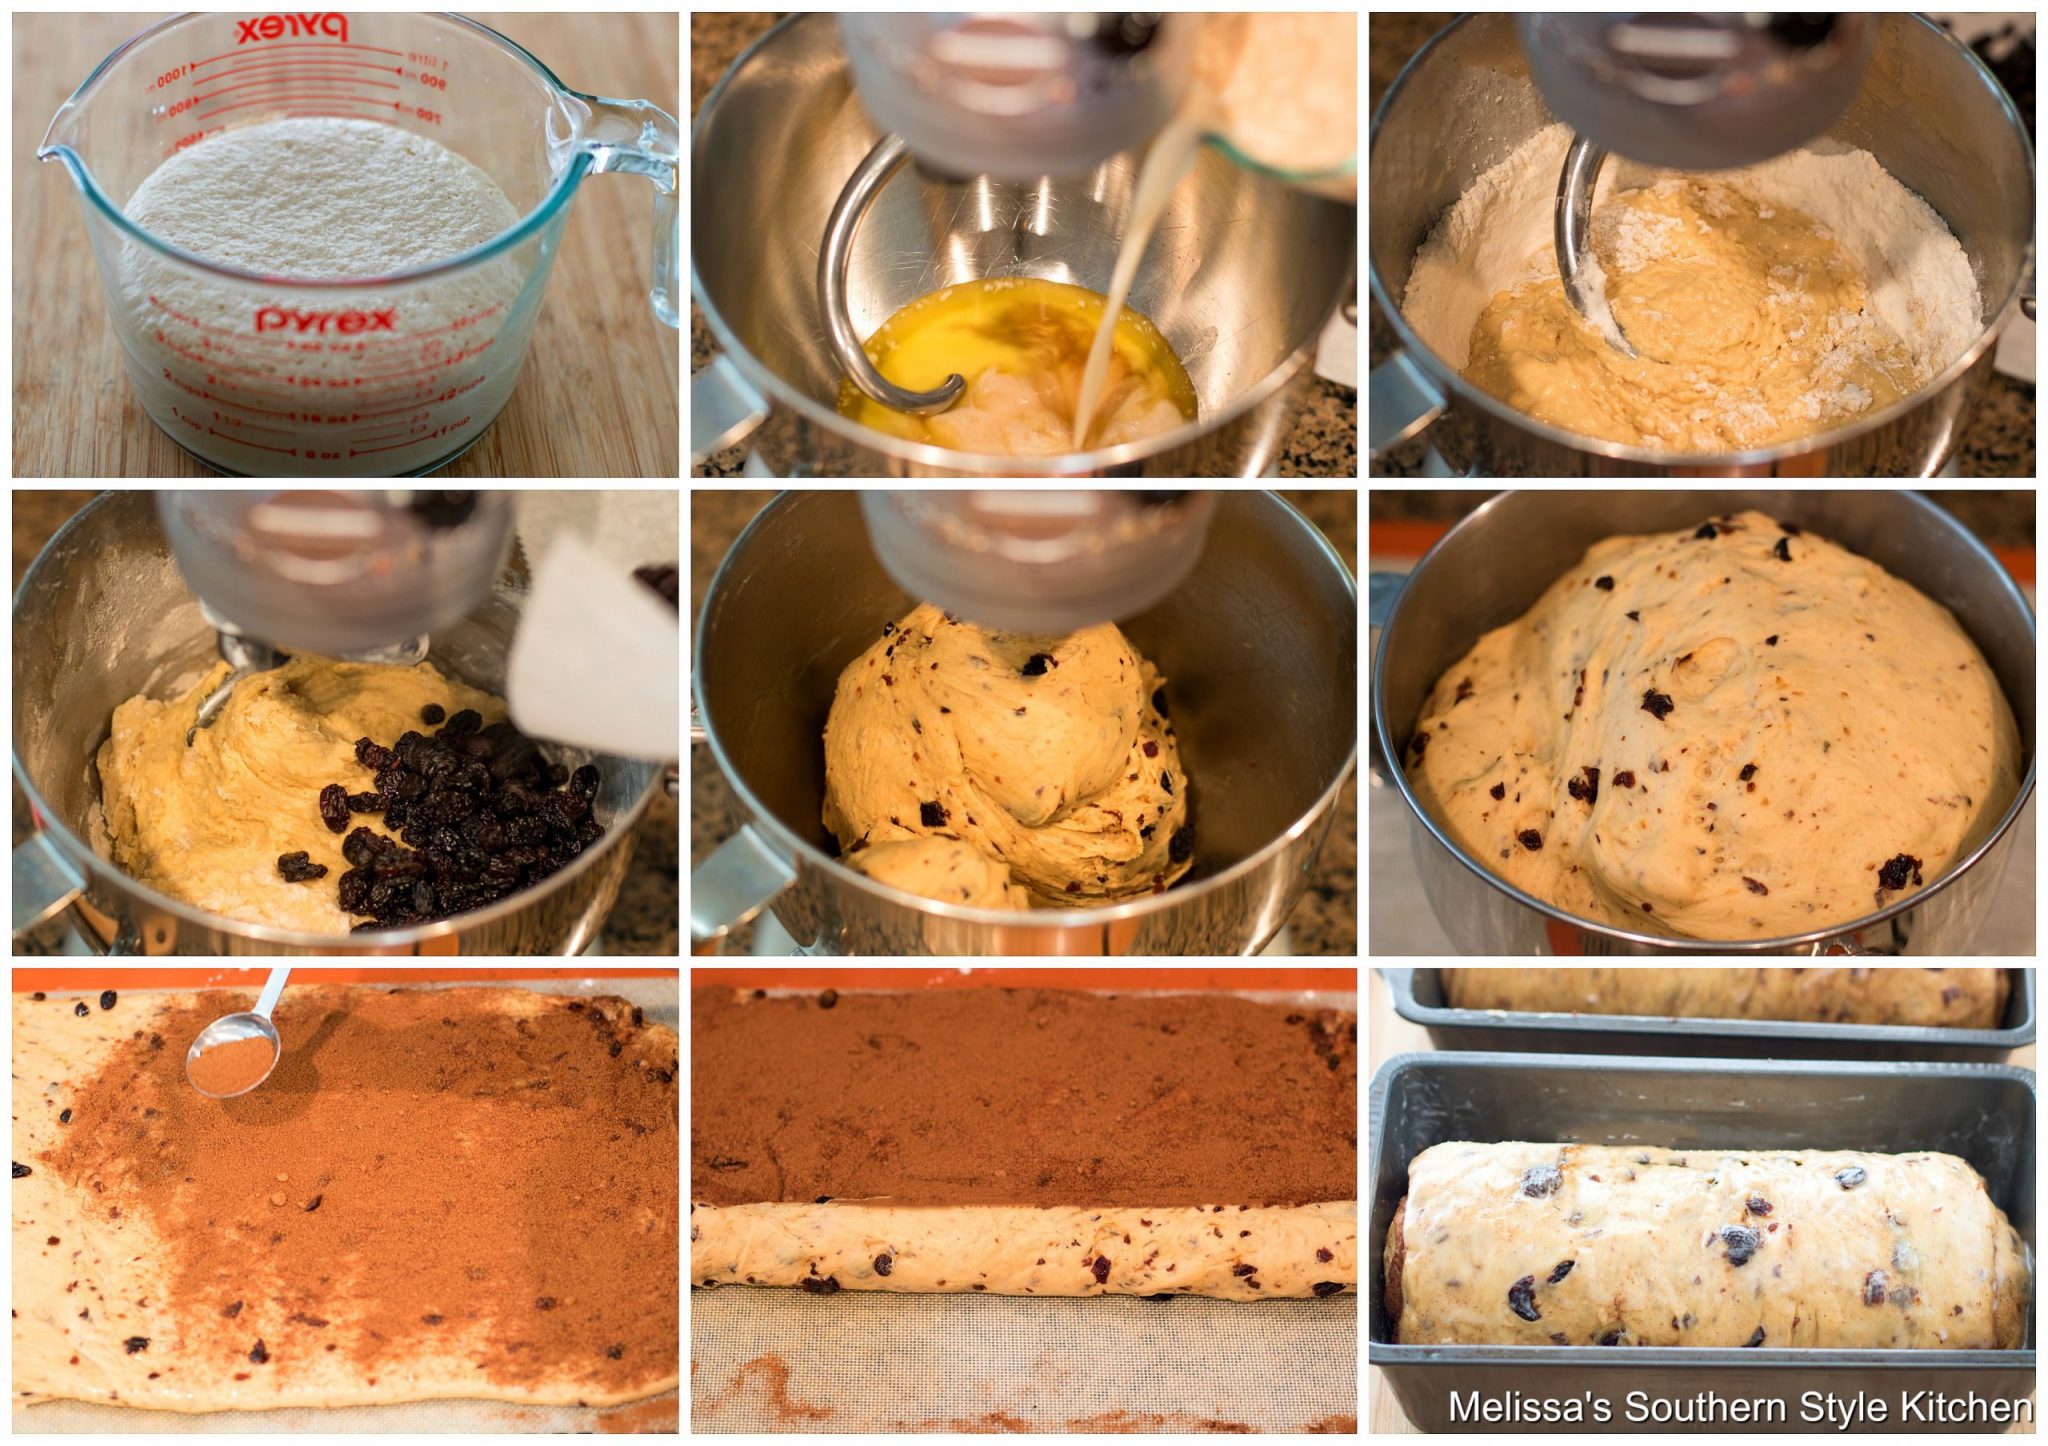 Step-by-step preparation images for cinnamon raisin bread